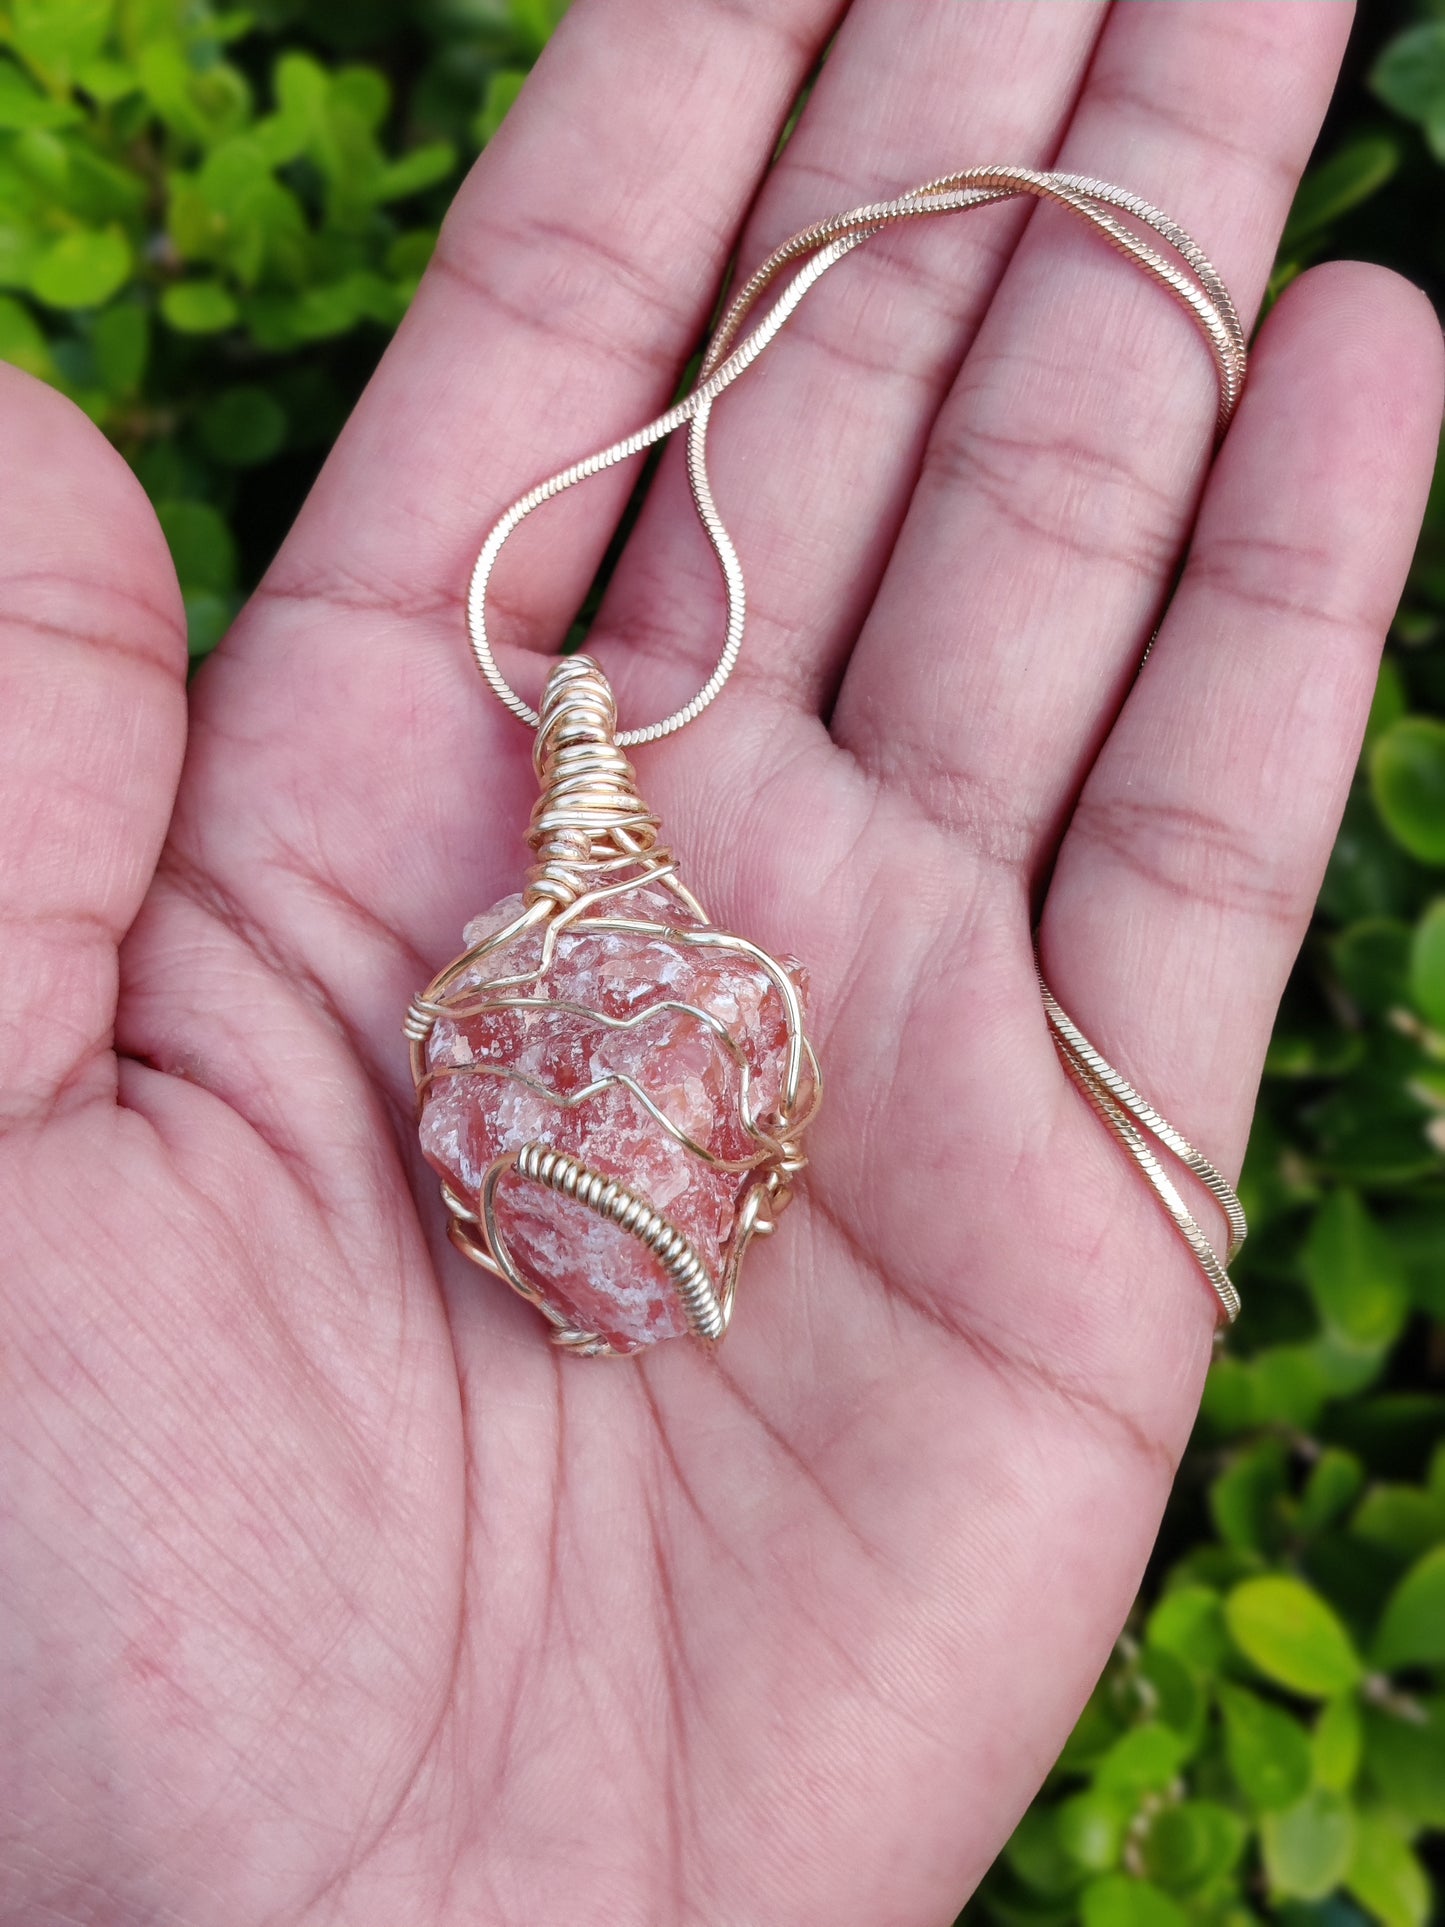 Red Calcite Crystal Pendant w/ chain